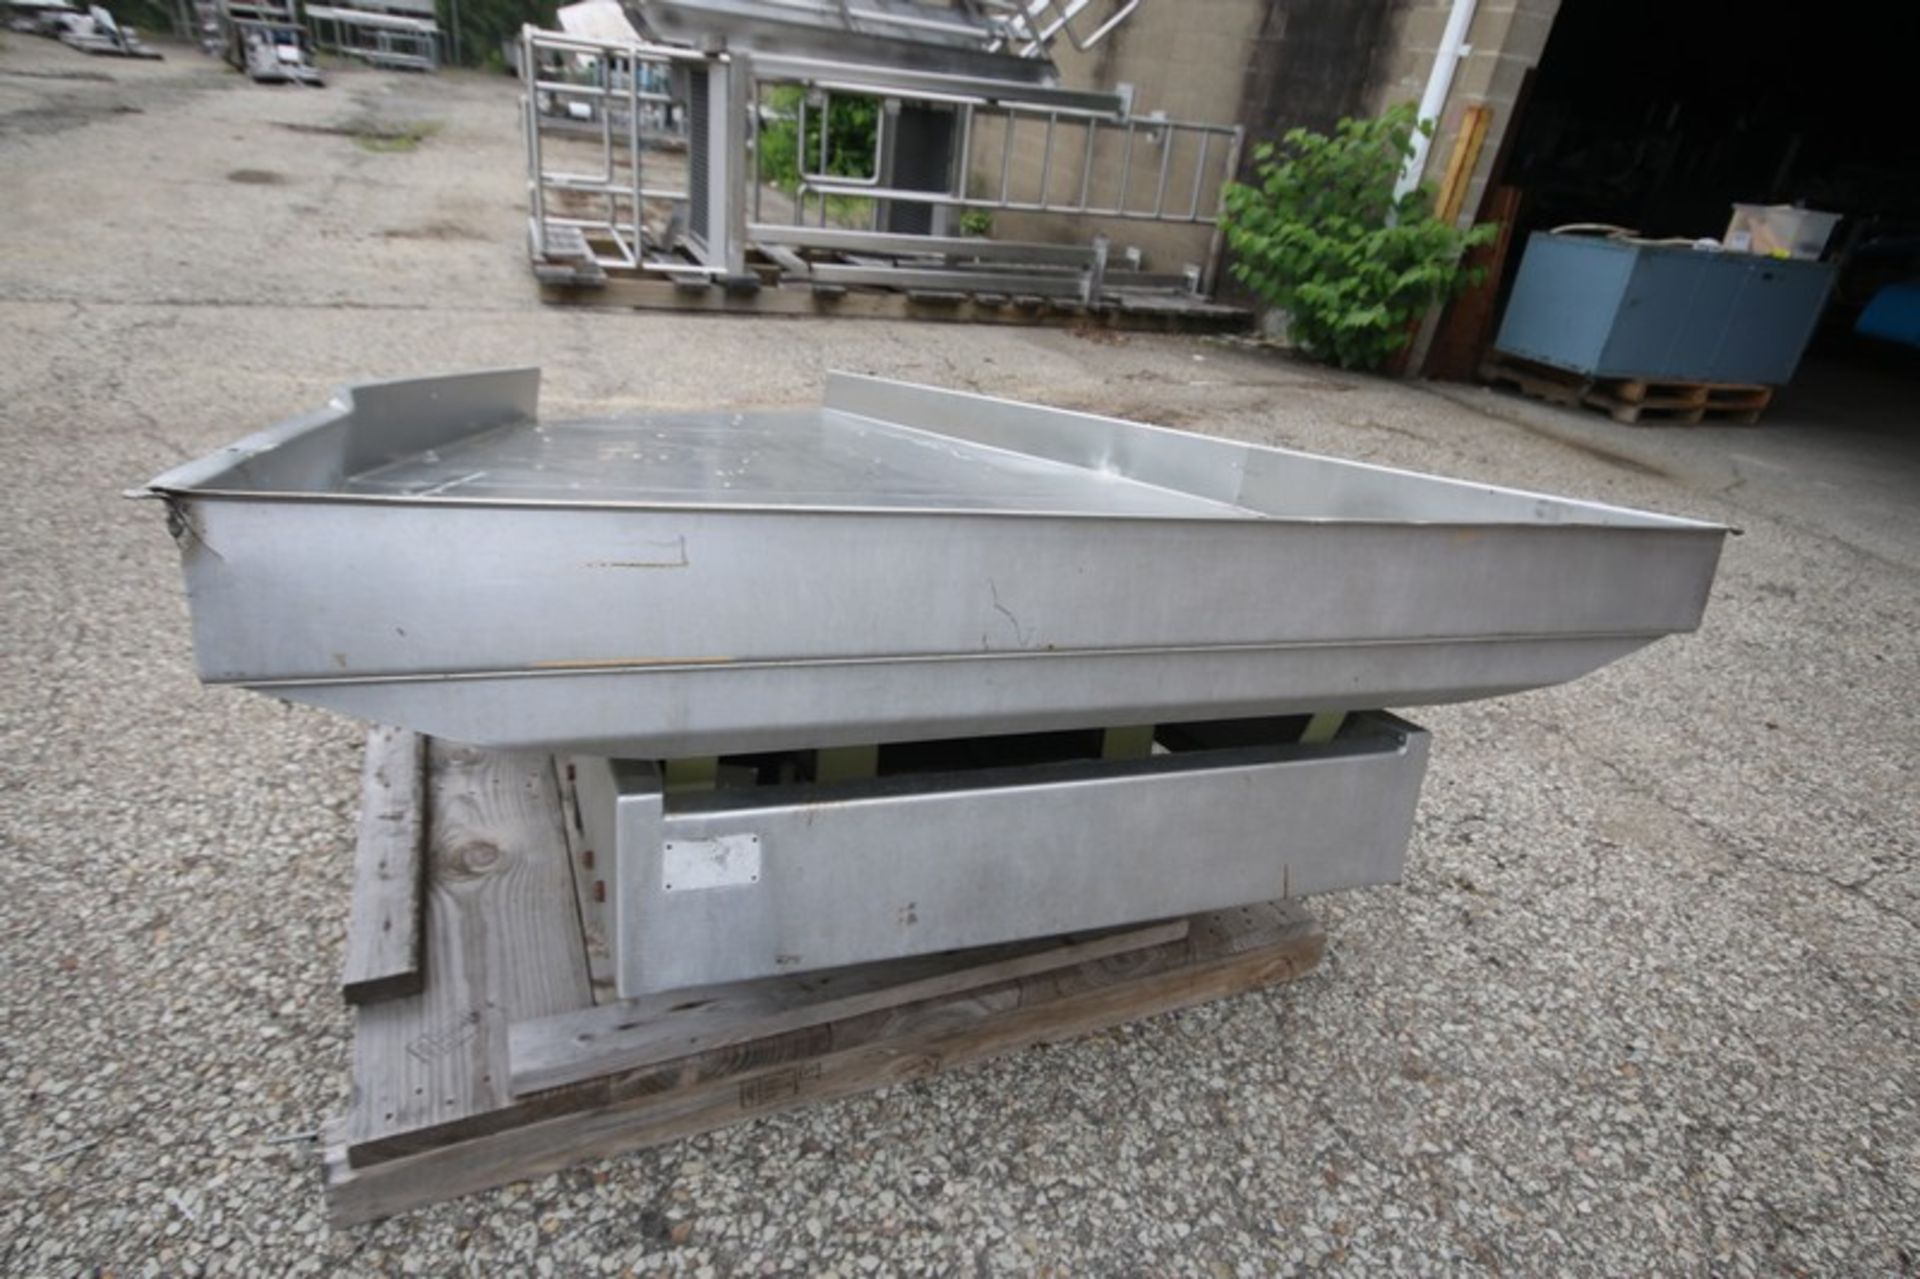 Allen Aprox. 9' L x 5" W x 5" D S/S Shaker Conveyor (INV#80283)(Located @ the MDG Auction Showroom - Image 4 of 4